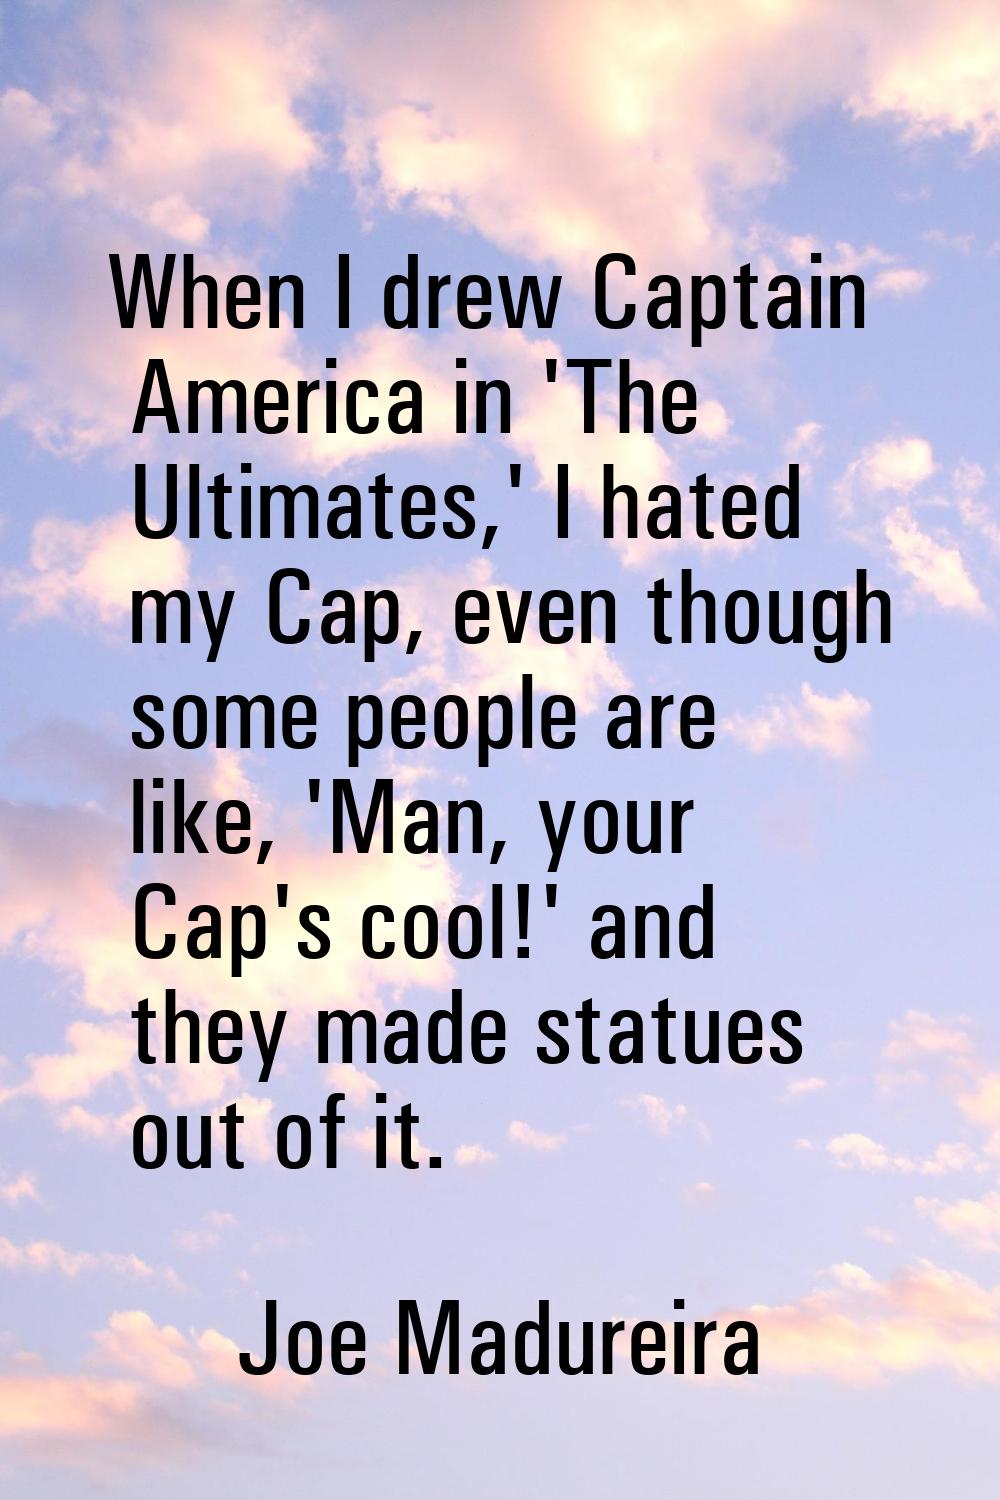 When I drew Captain America in 'The Ultimates,' I hated my Cap, even though some people are like, '